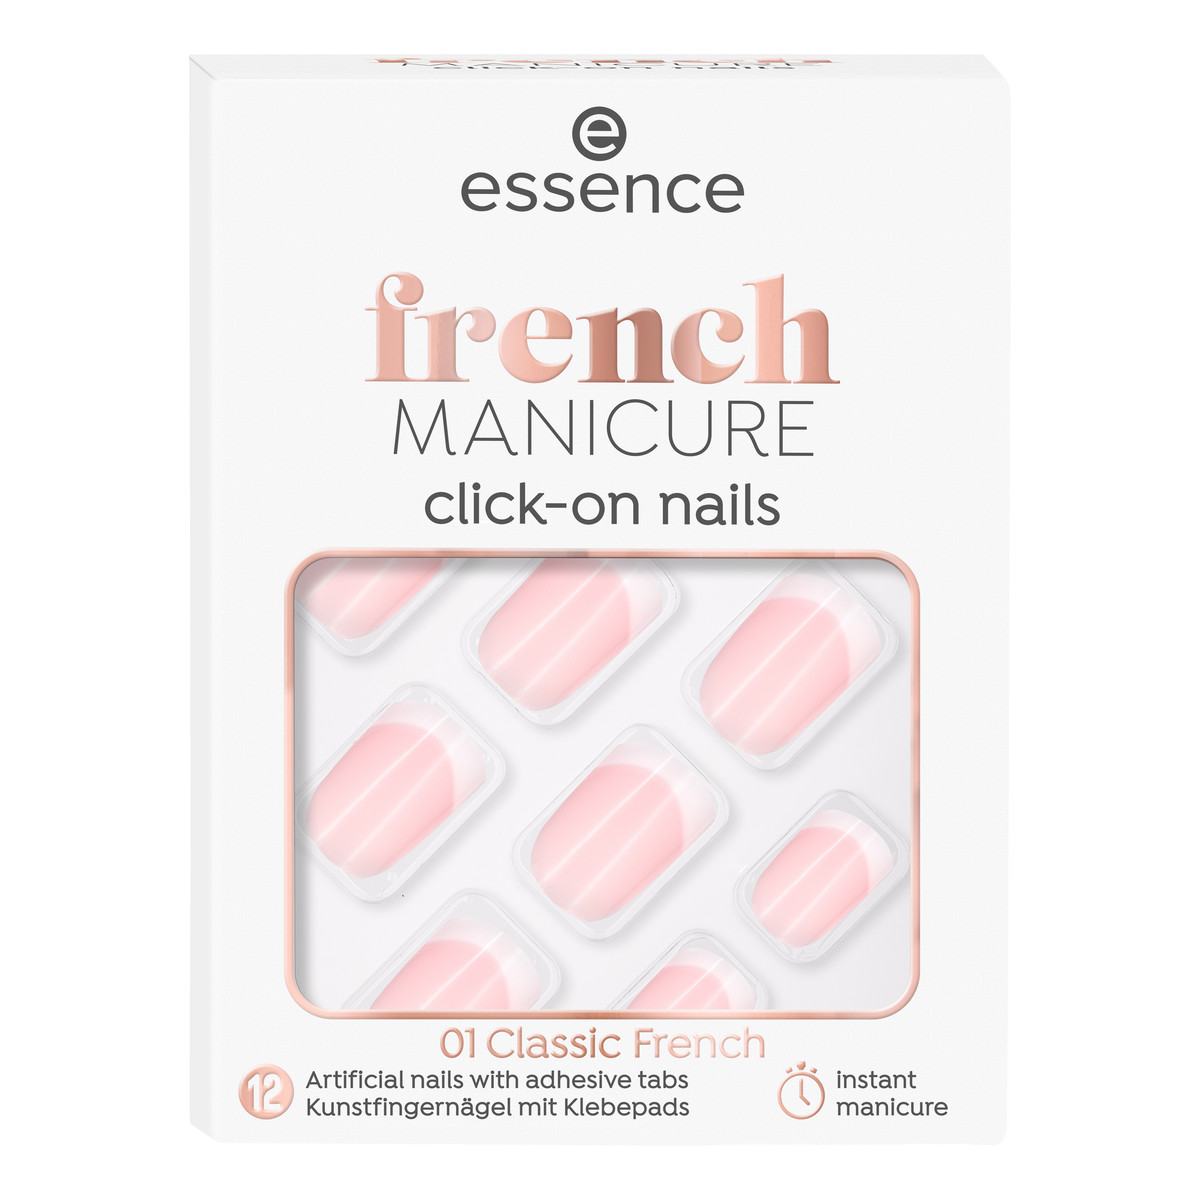 Essence French Manicure Click-on Nails 01 Classic French 12 szt